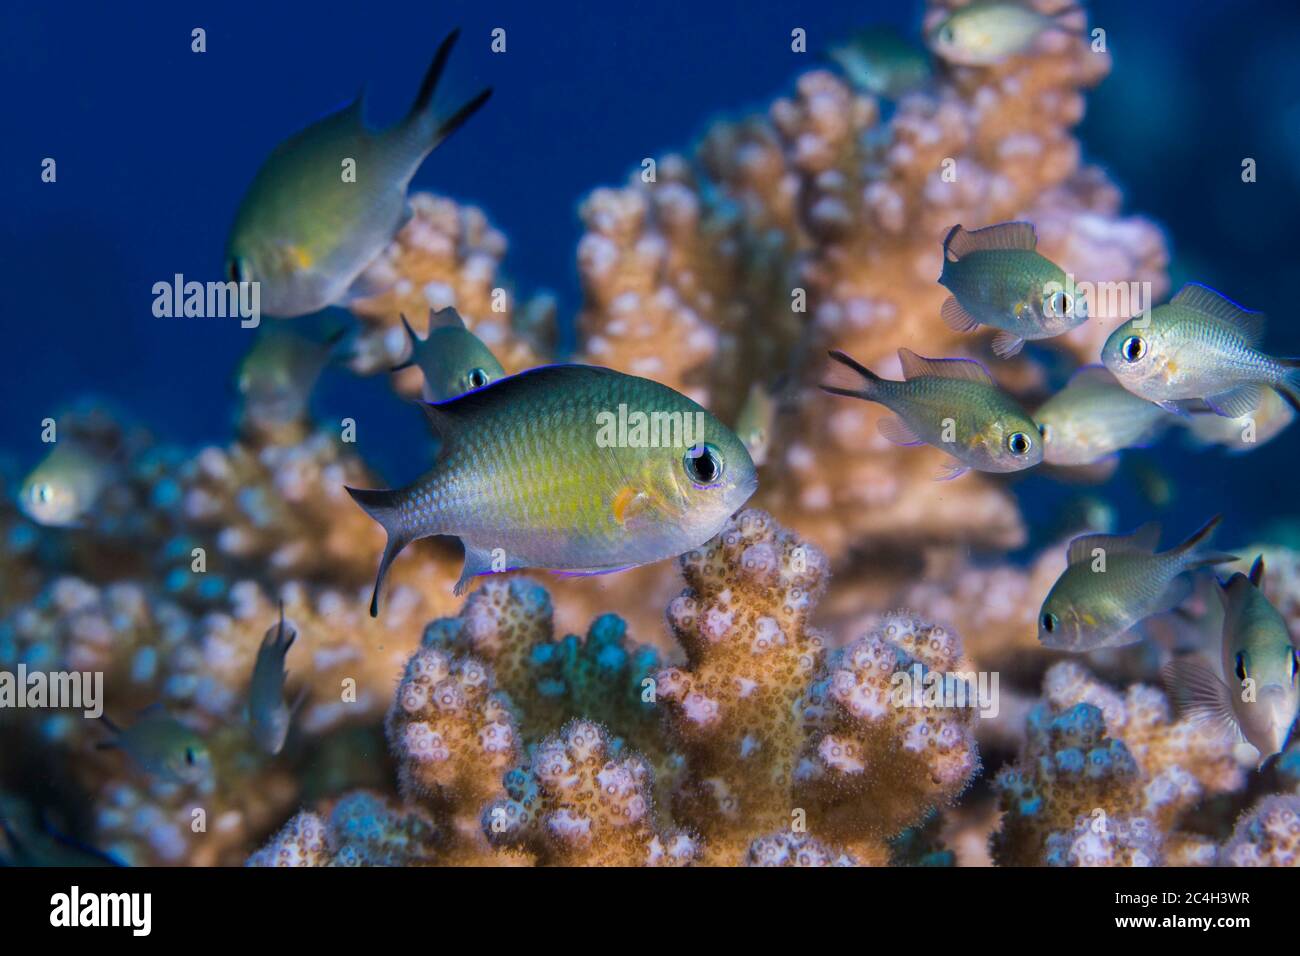 Arabian chromis (Chromis flavaxilla) macro of small light yellow color fish living in a coral. Stock Photo